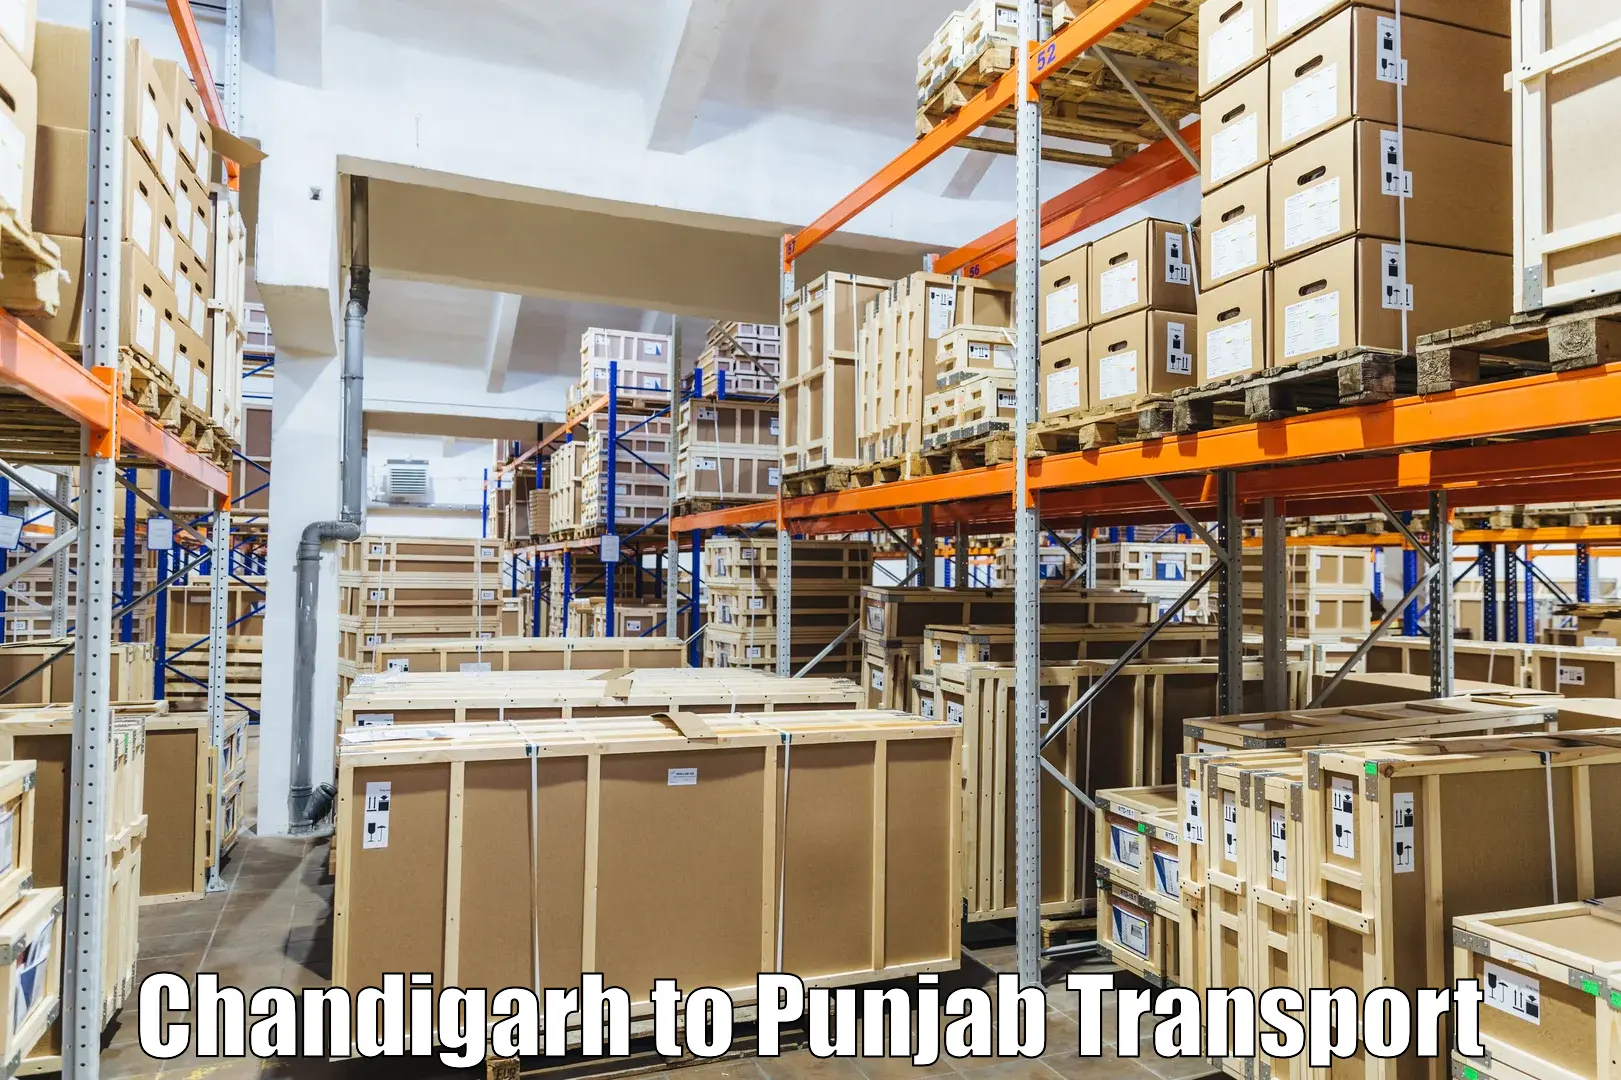 Domestic goods transportation services Chandigarh to Mohali